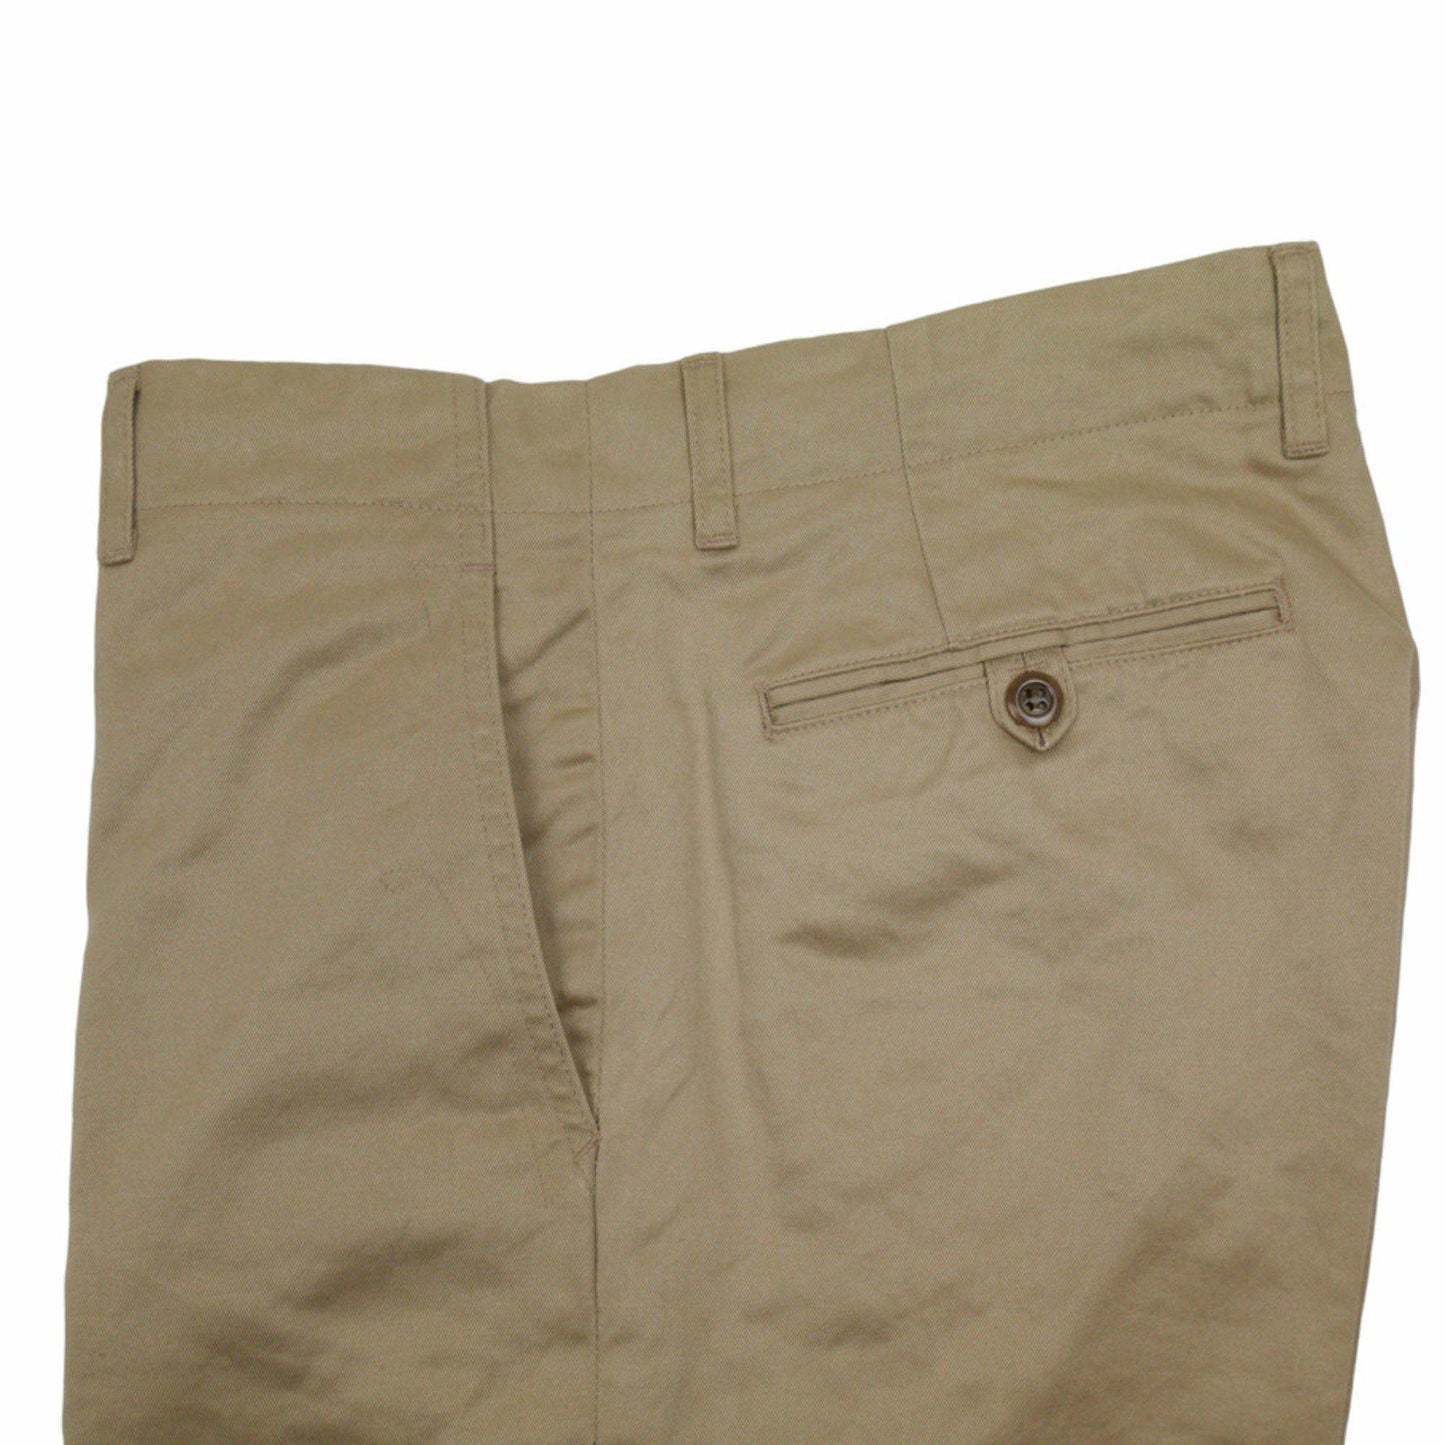 OR GLORY | Wide Chino Pants "Ronnie" - Sopwith camel